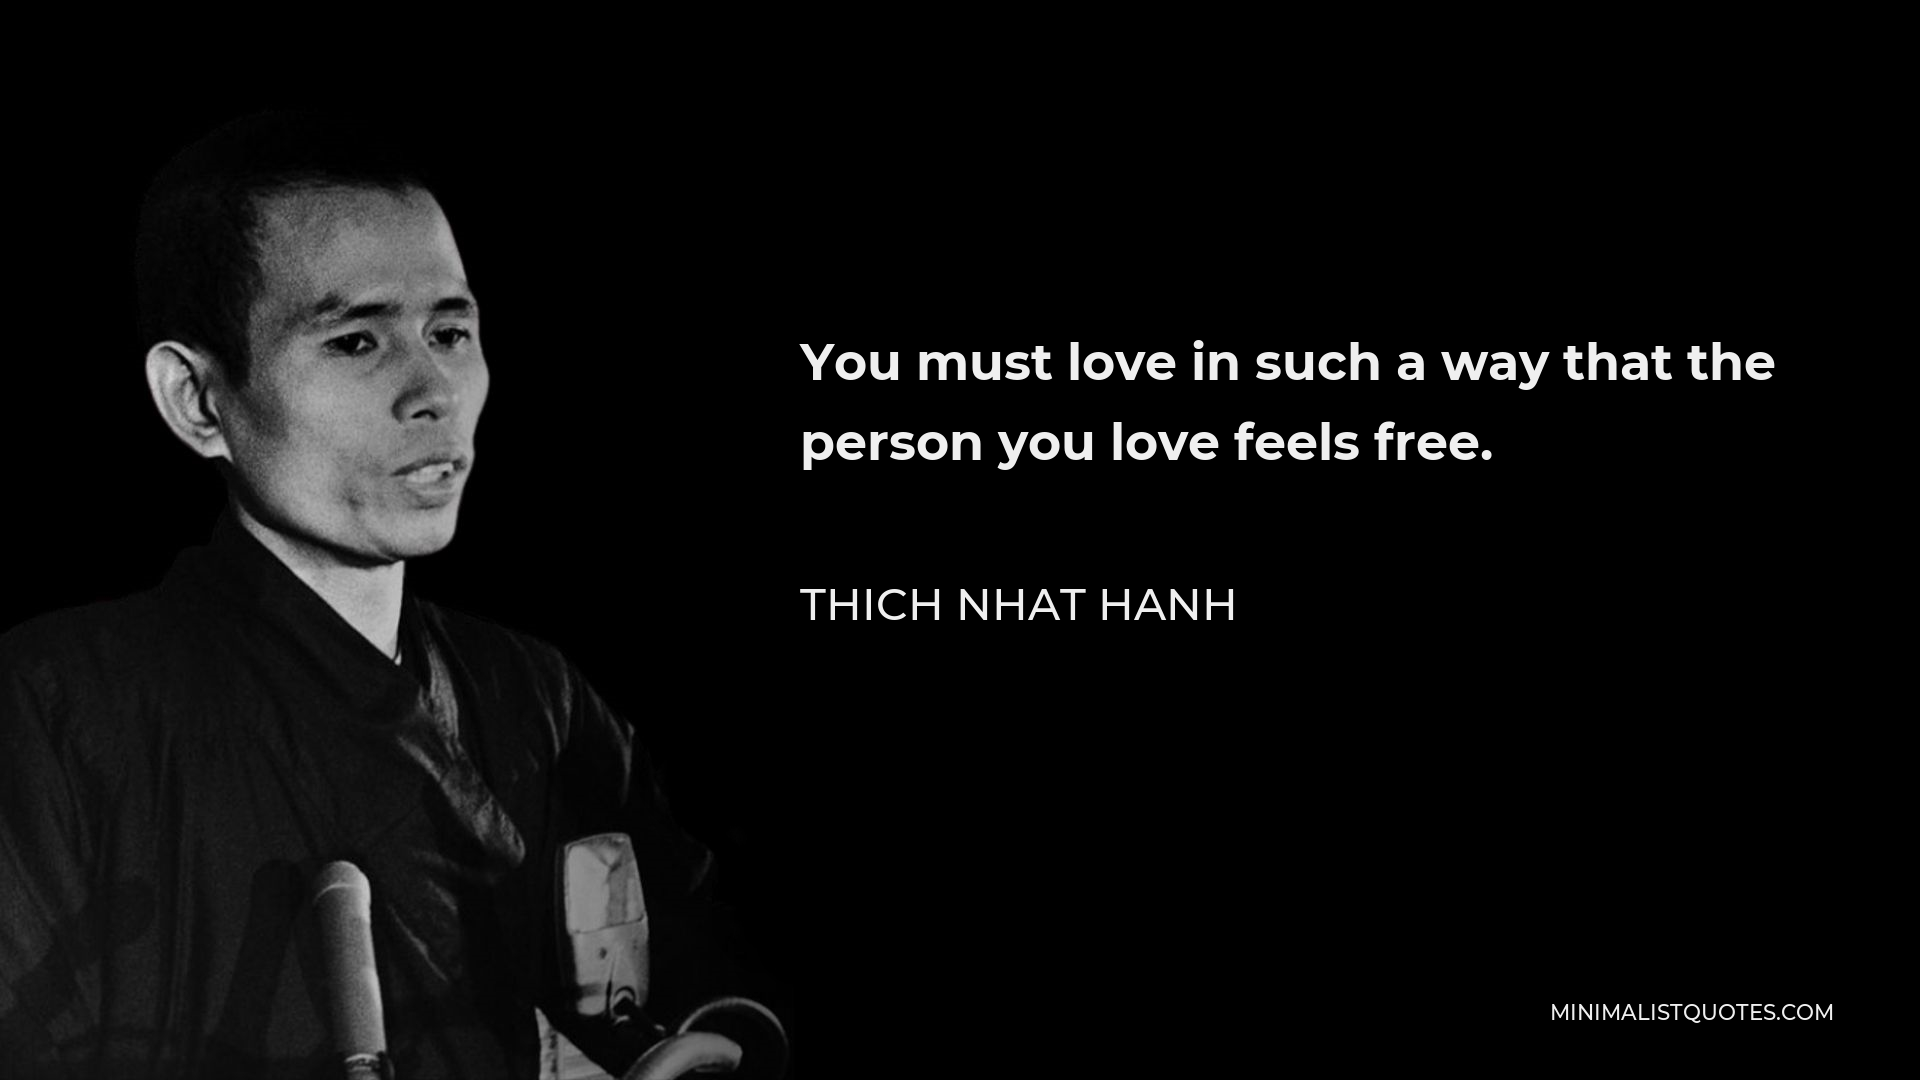 Thich Nhat Hanh Quote - You must love in such a way that the person you love feels free.